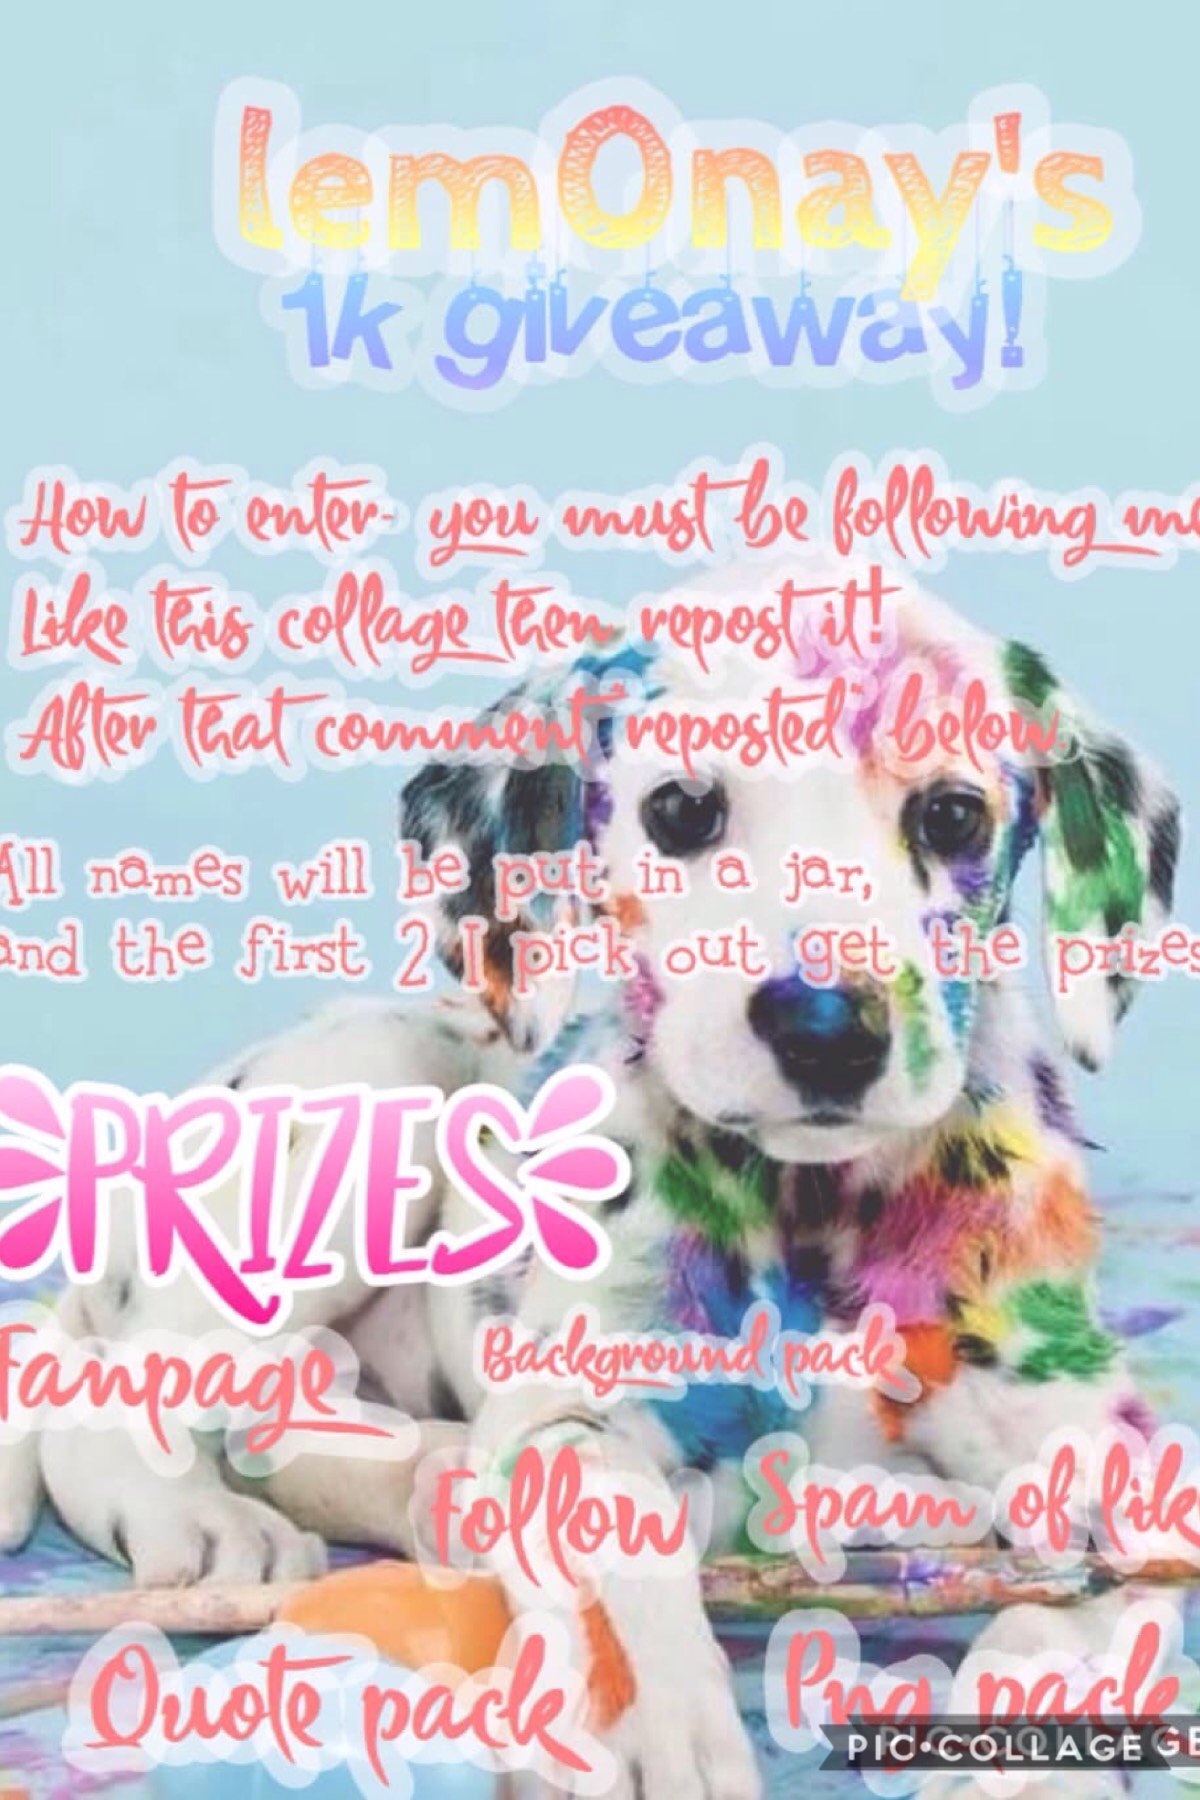 LemOnay1kgiveaway if you aren't following her already go do so 